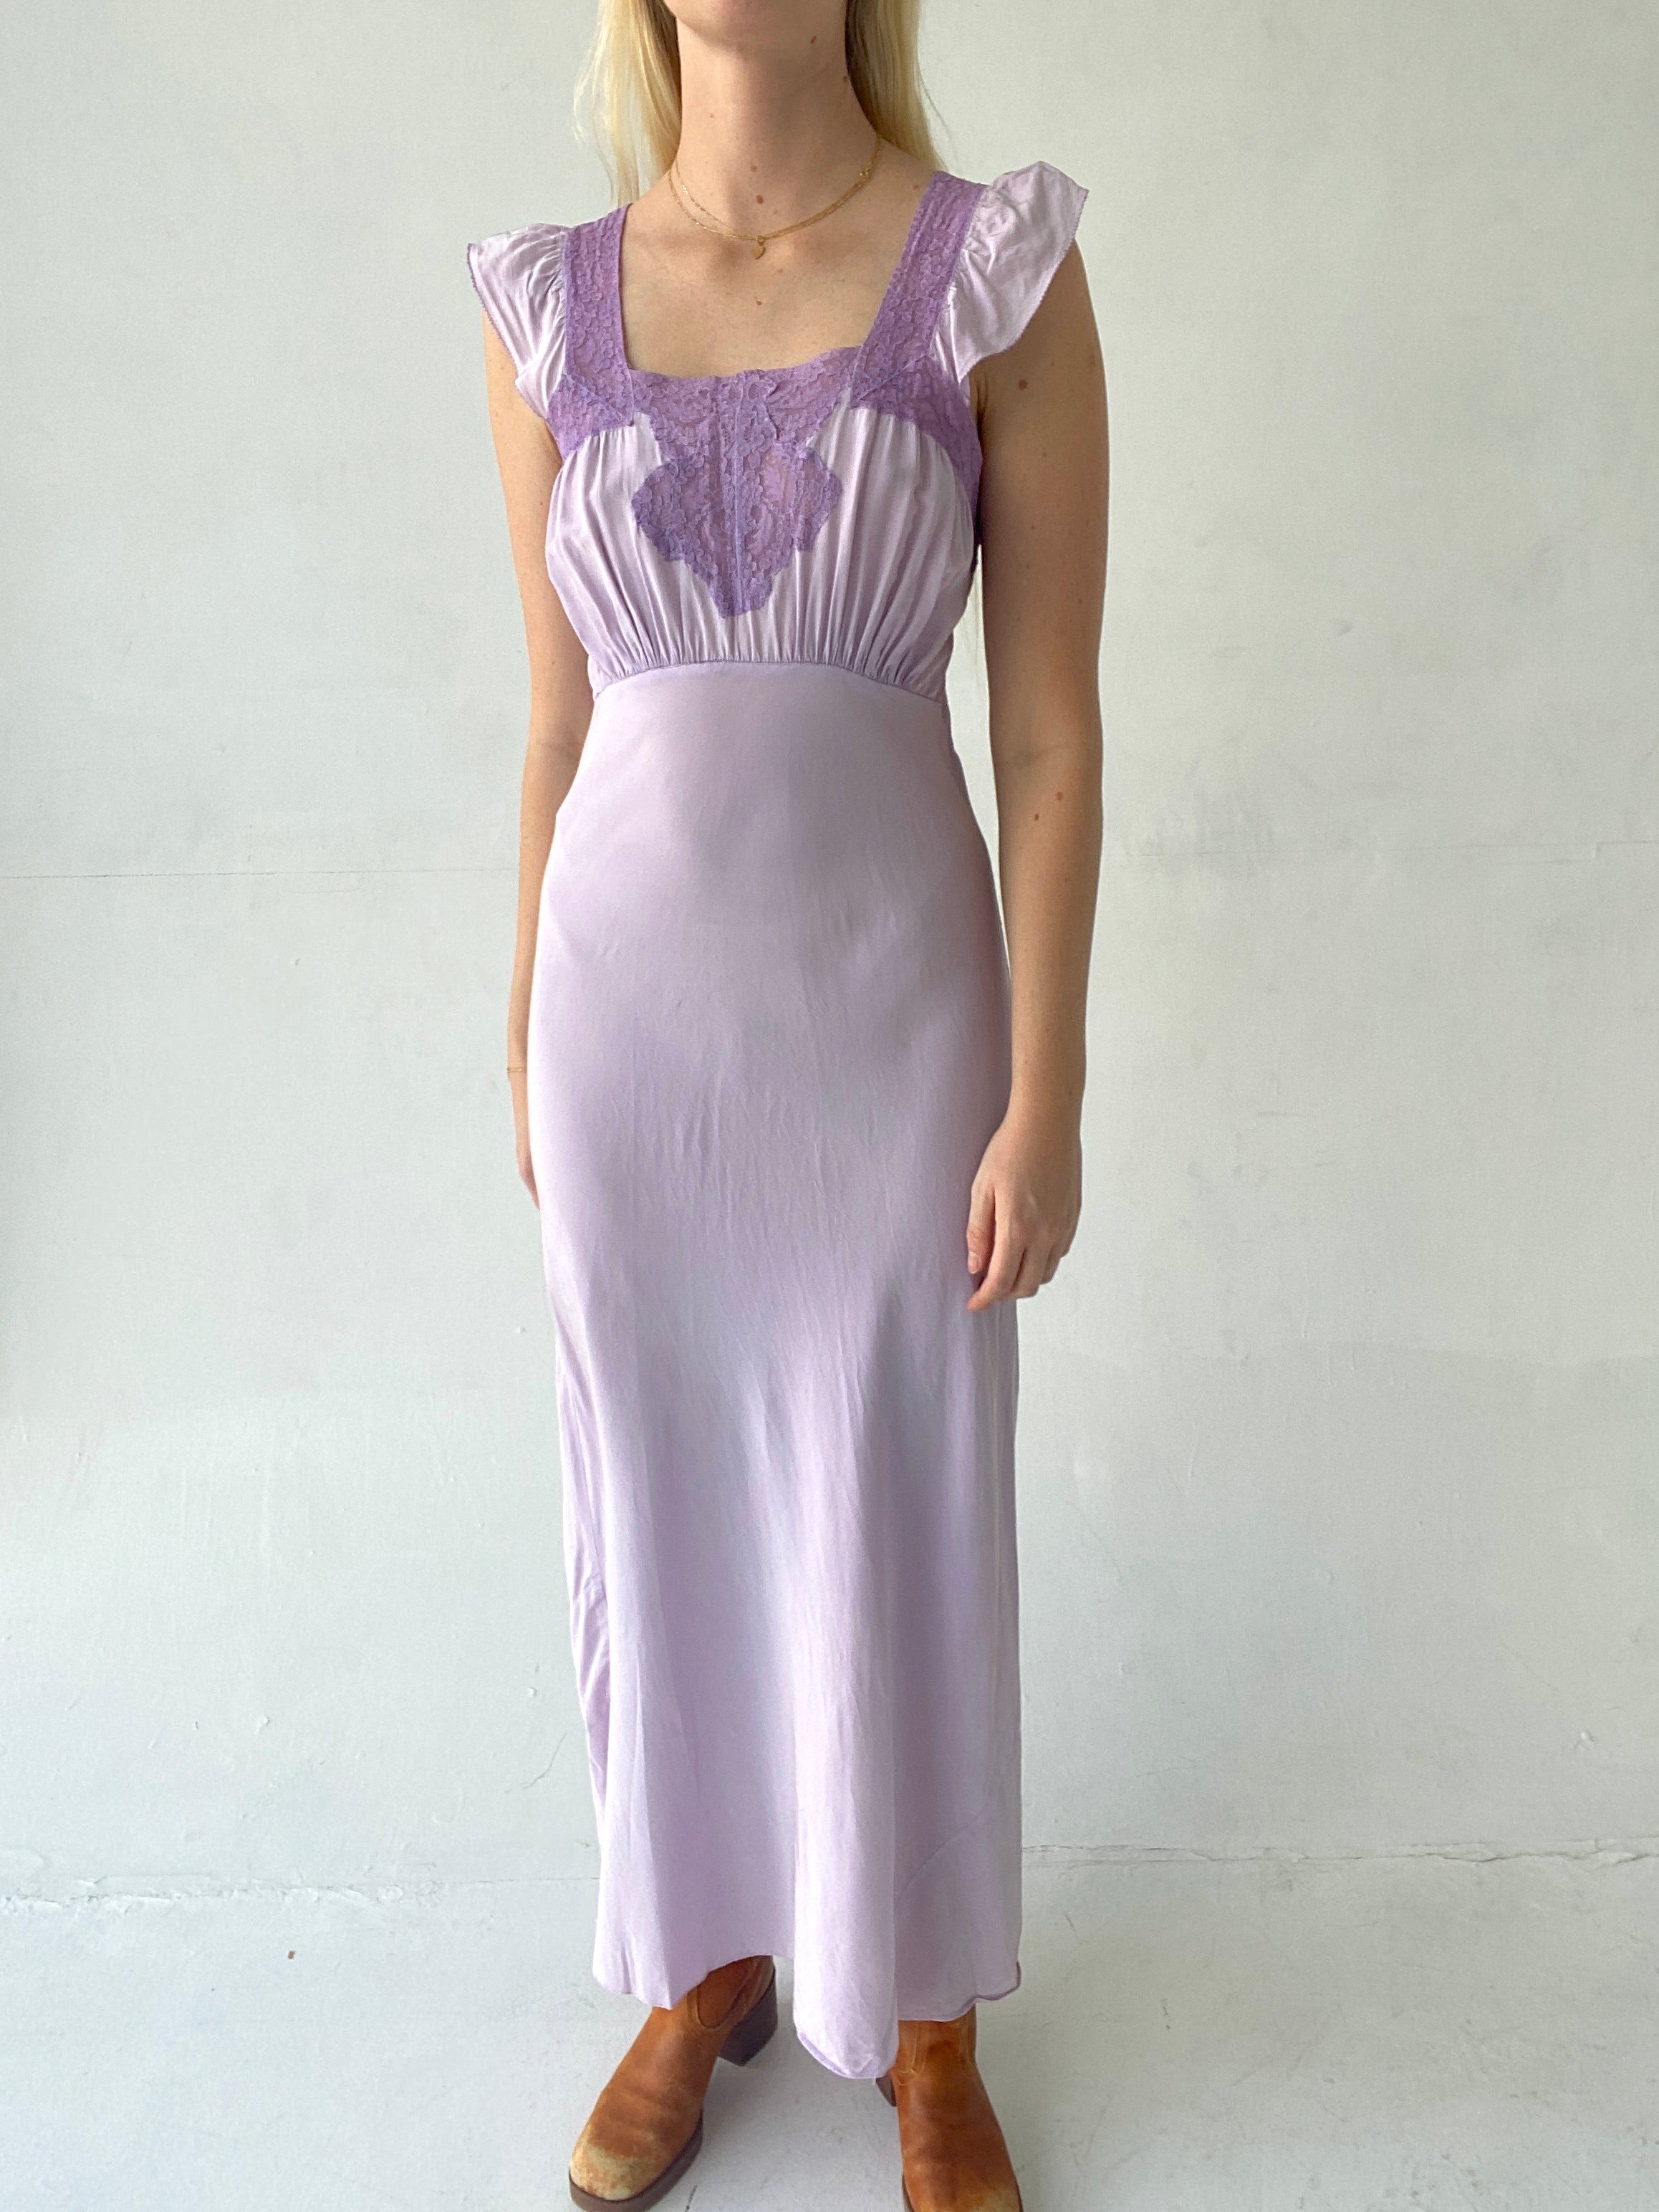 Hand Dyed Saie Lilac Slip with Lace and Ruffle Sleeve